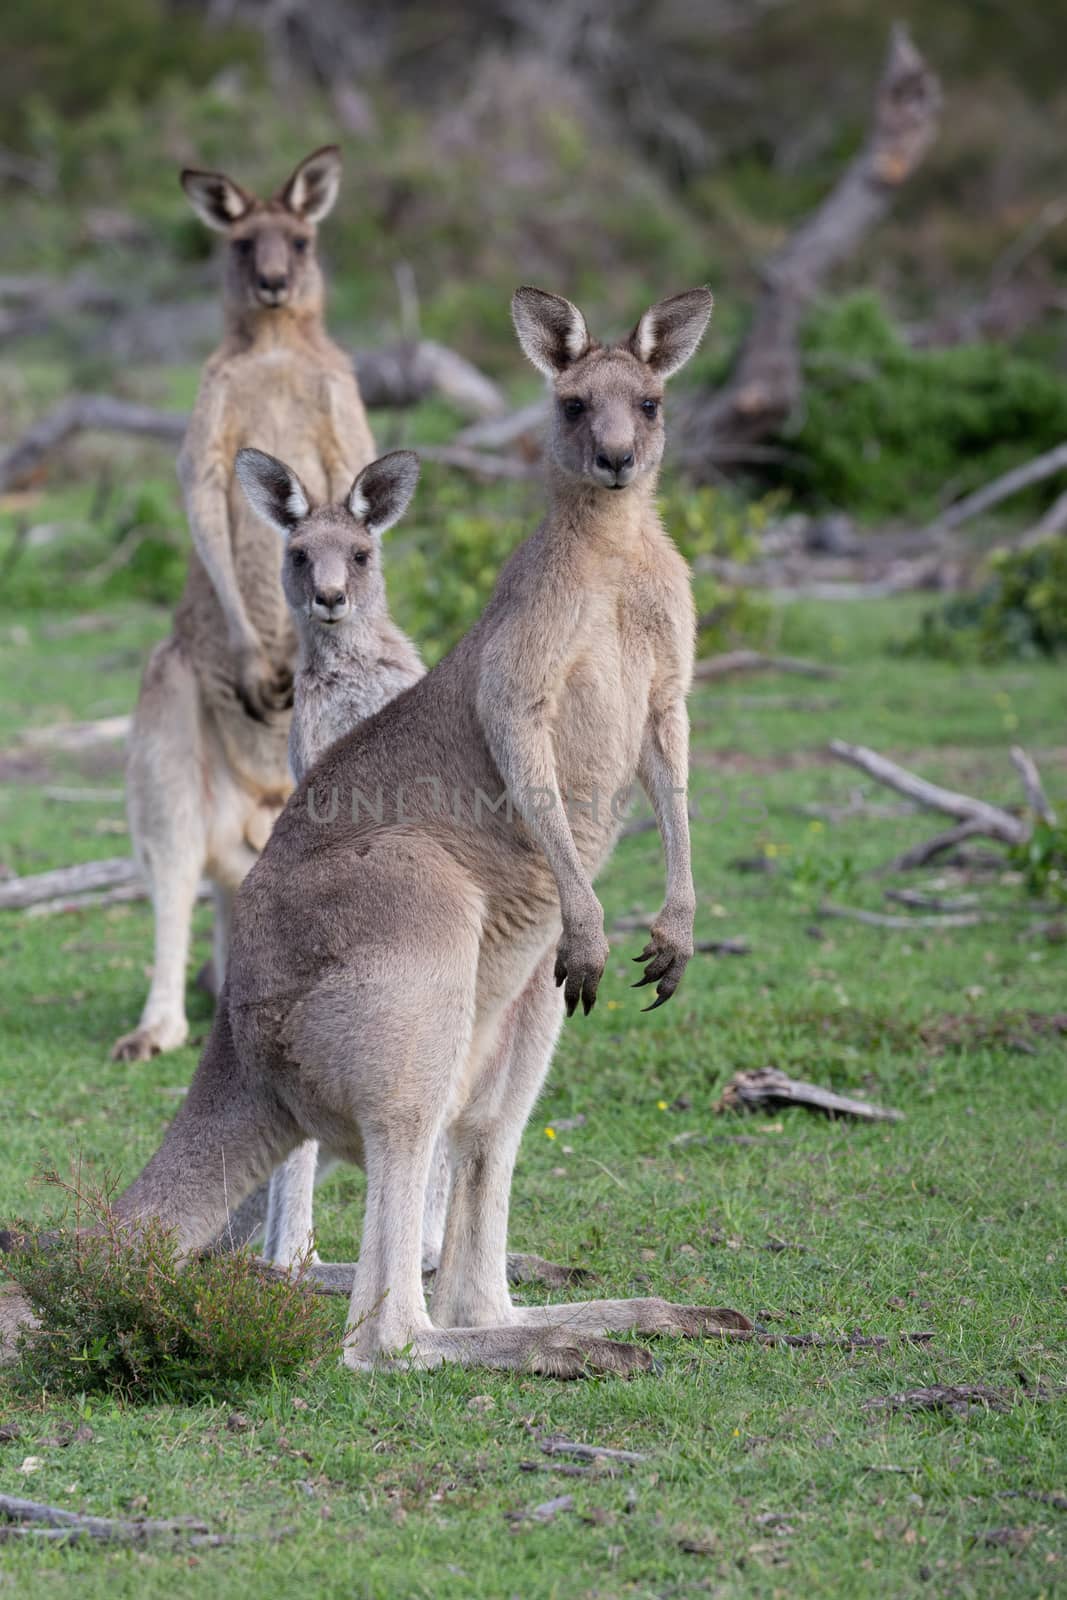 Three curious kangaroos alerted to my presence in the bushland of the beautiful coastal bushland of south coast of New South Wales Australia